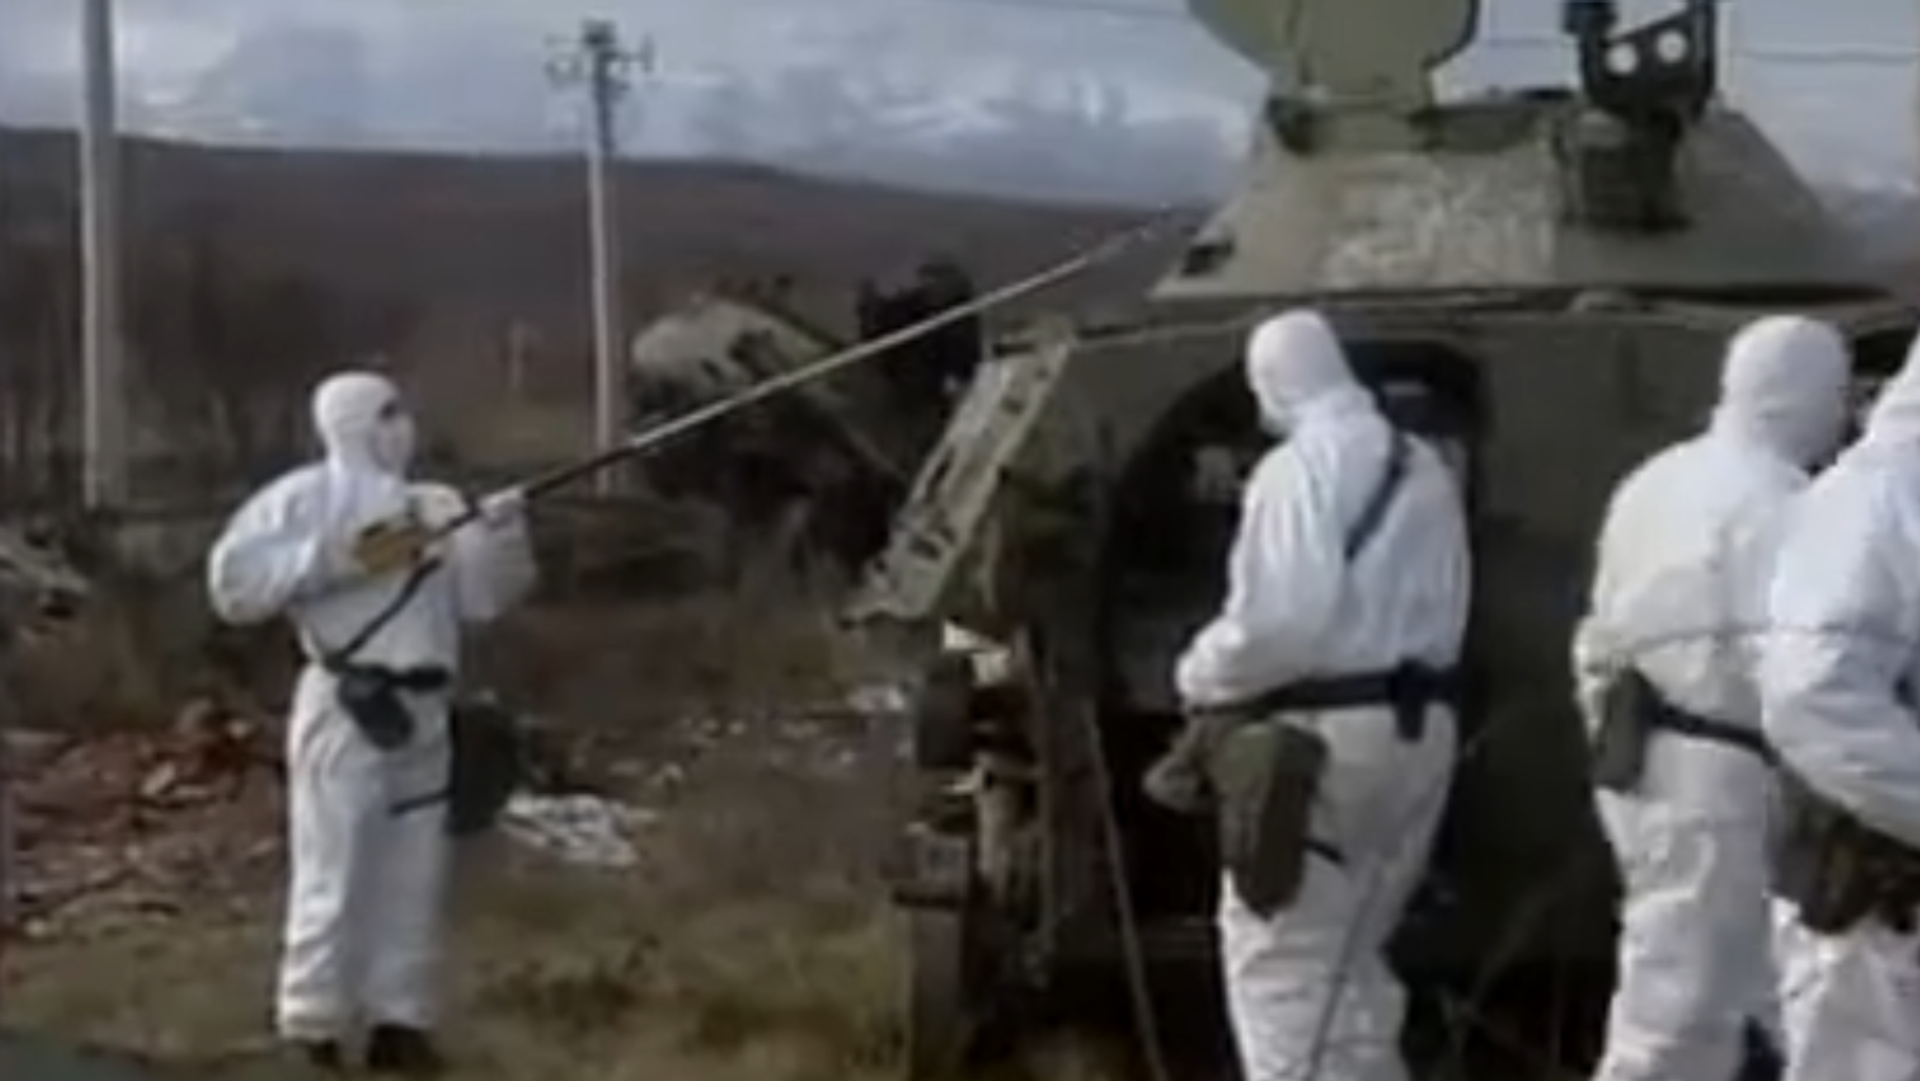 Specialists inspecting radiation levels in Kosovo in 2001, two years after the 1999 NATO bombings. Screengrab from archival video. - Sputnik International, 1920, 23.07.2022